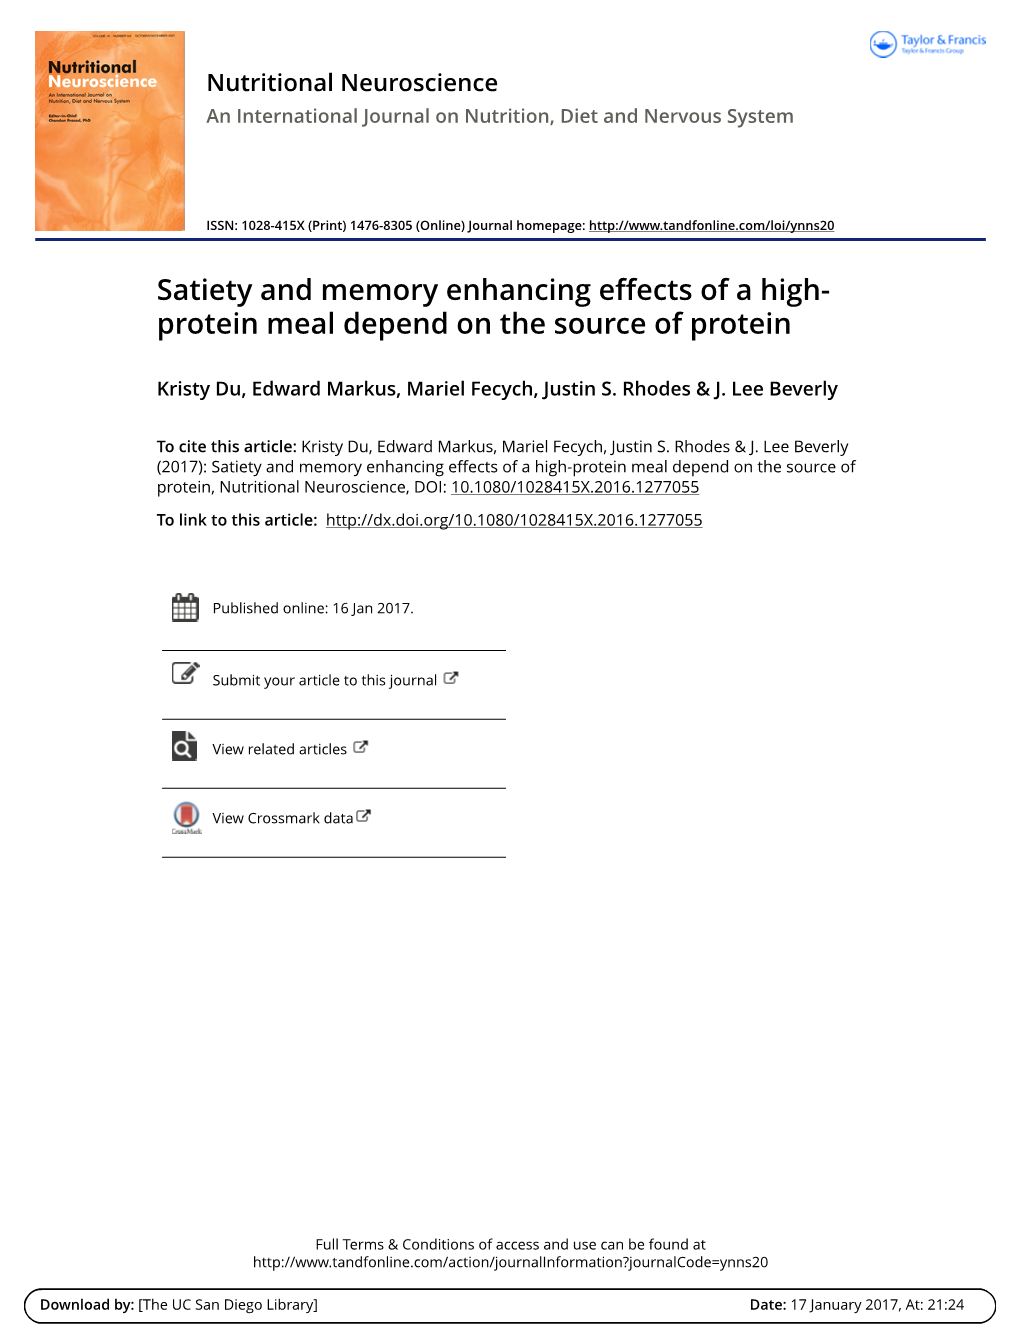 Satiety and Memory Enhancing Effects of a High-Protein Meal Depend on the Source of Protein, Nutritional Neuroscience, DOI: 10.1080/1028415X.2016.1277055